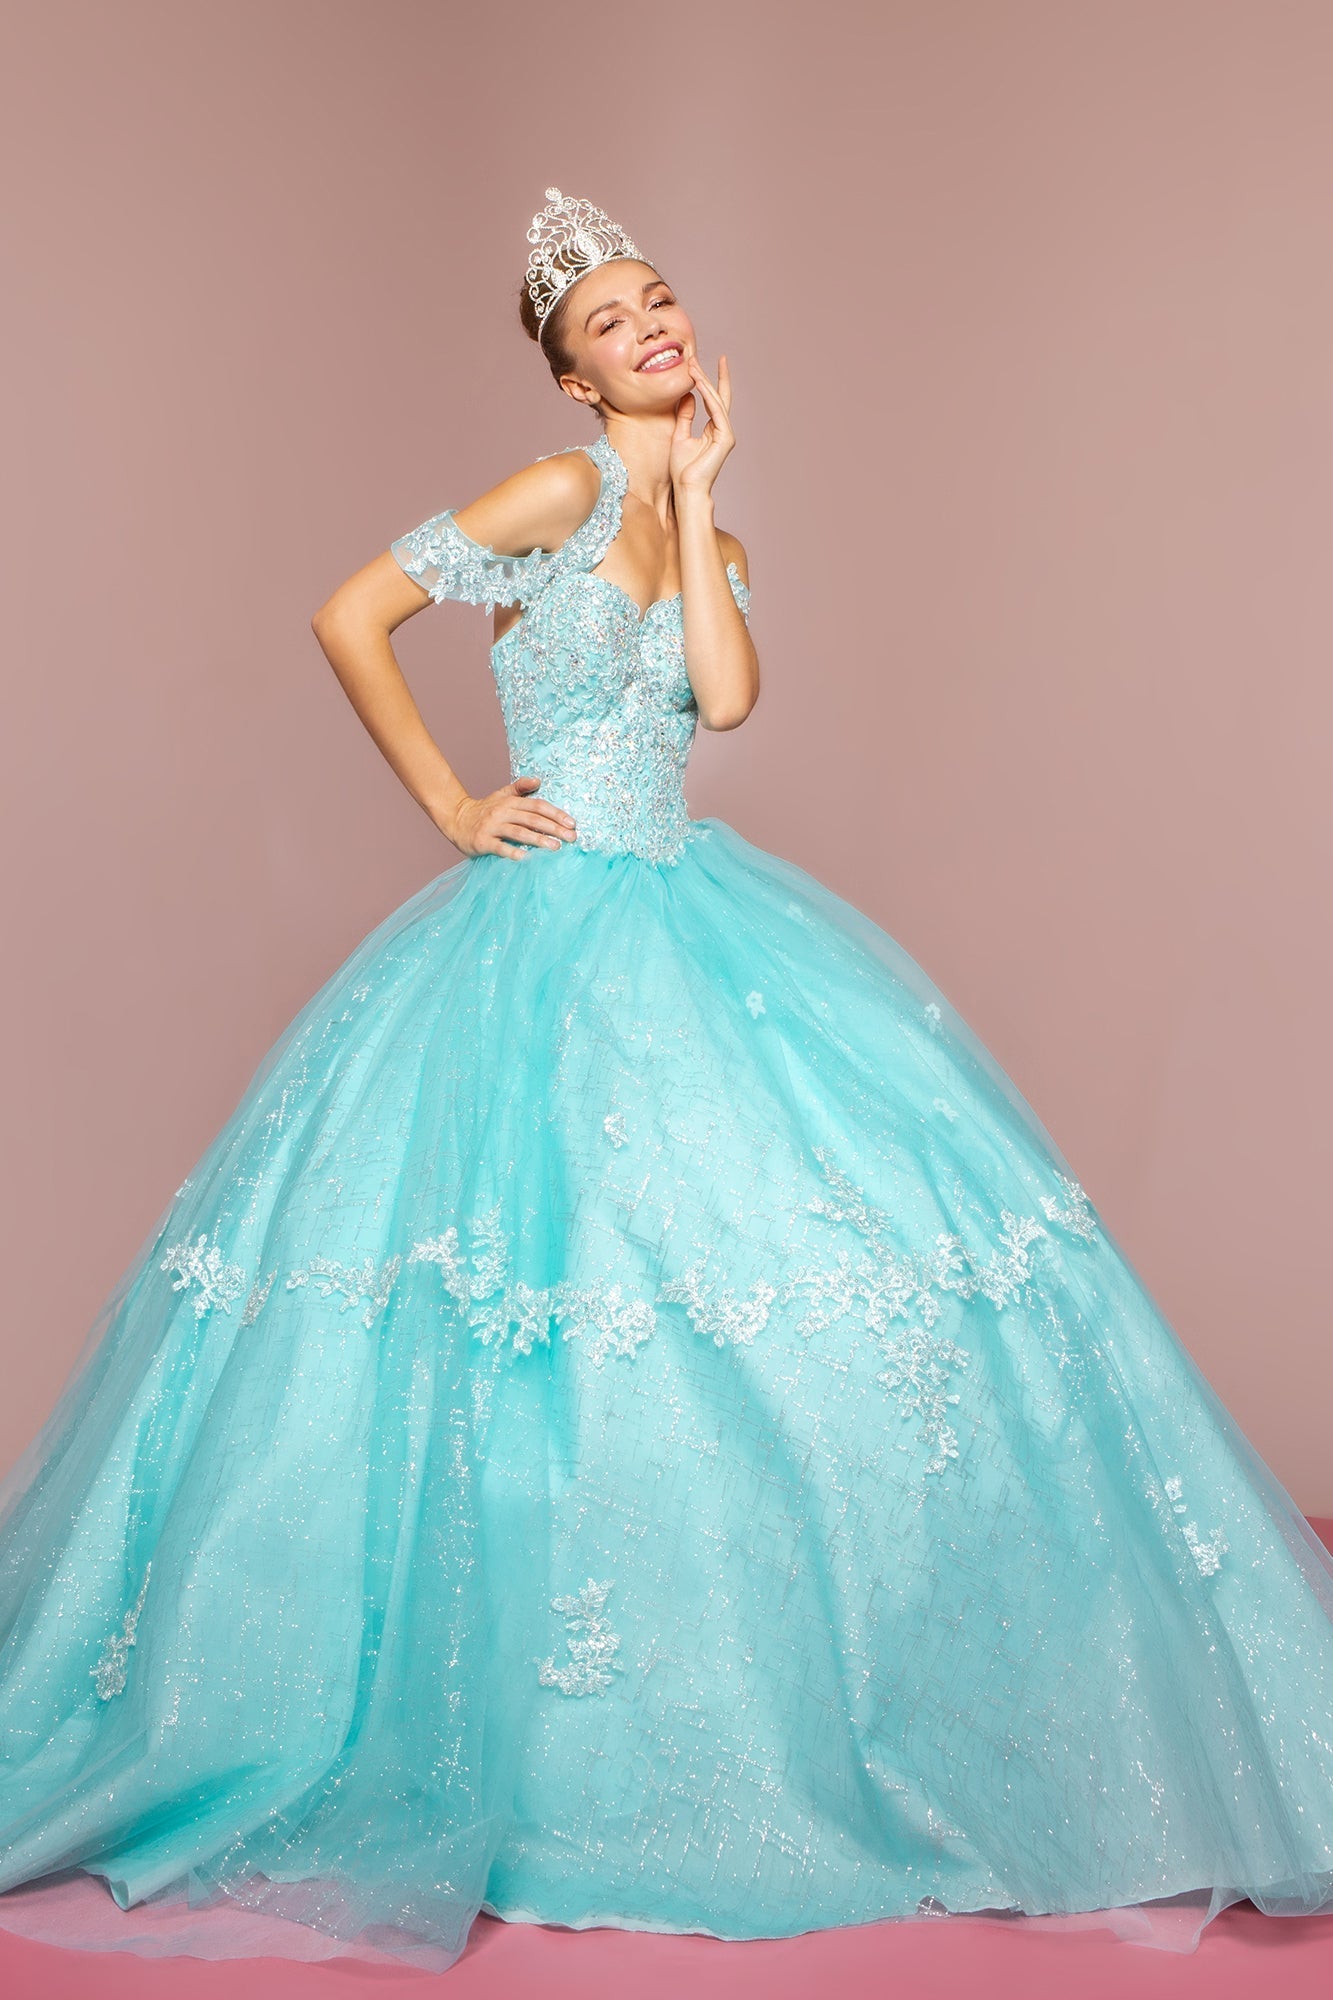 Embroidered Bodice Glitter Mesh Quinceanera Dress GLGL2602 Elsy Style QUINCEANERA